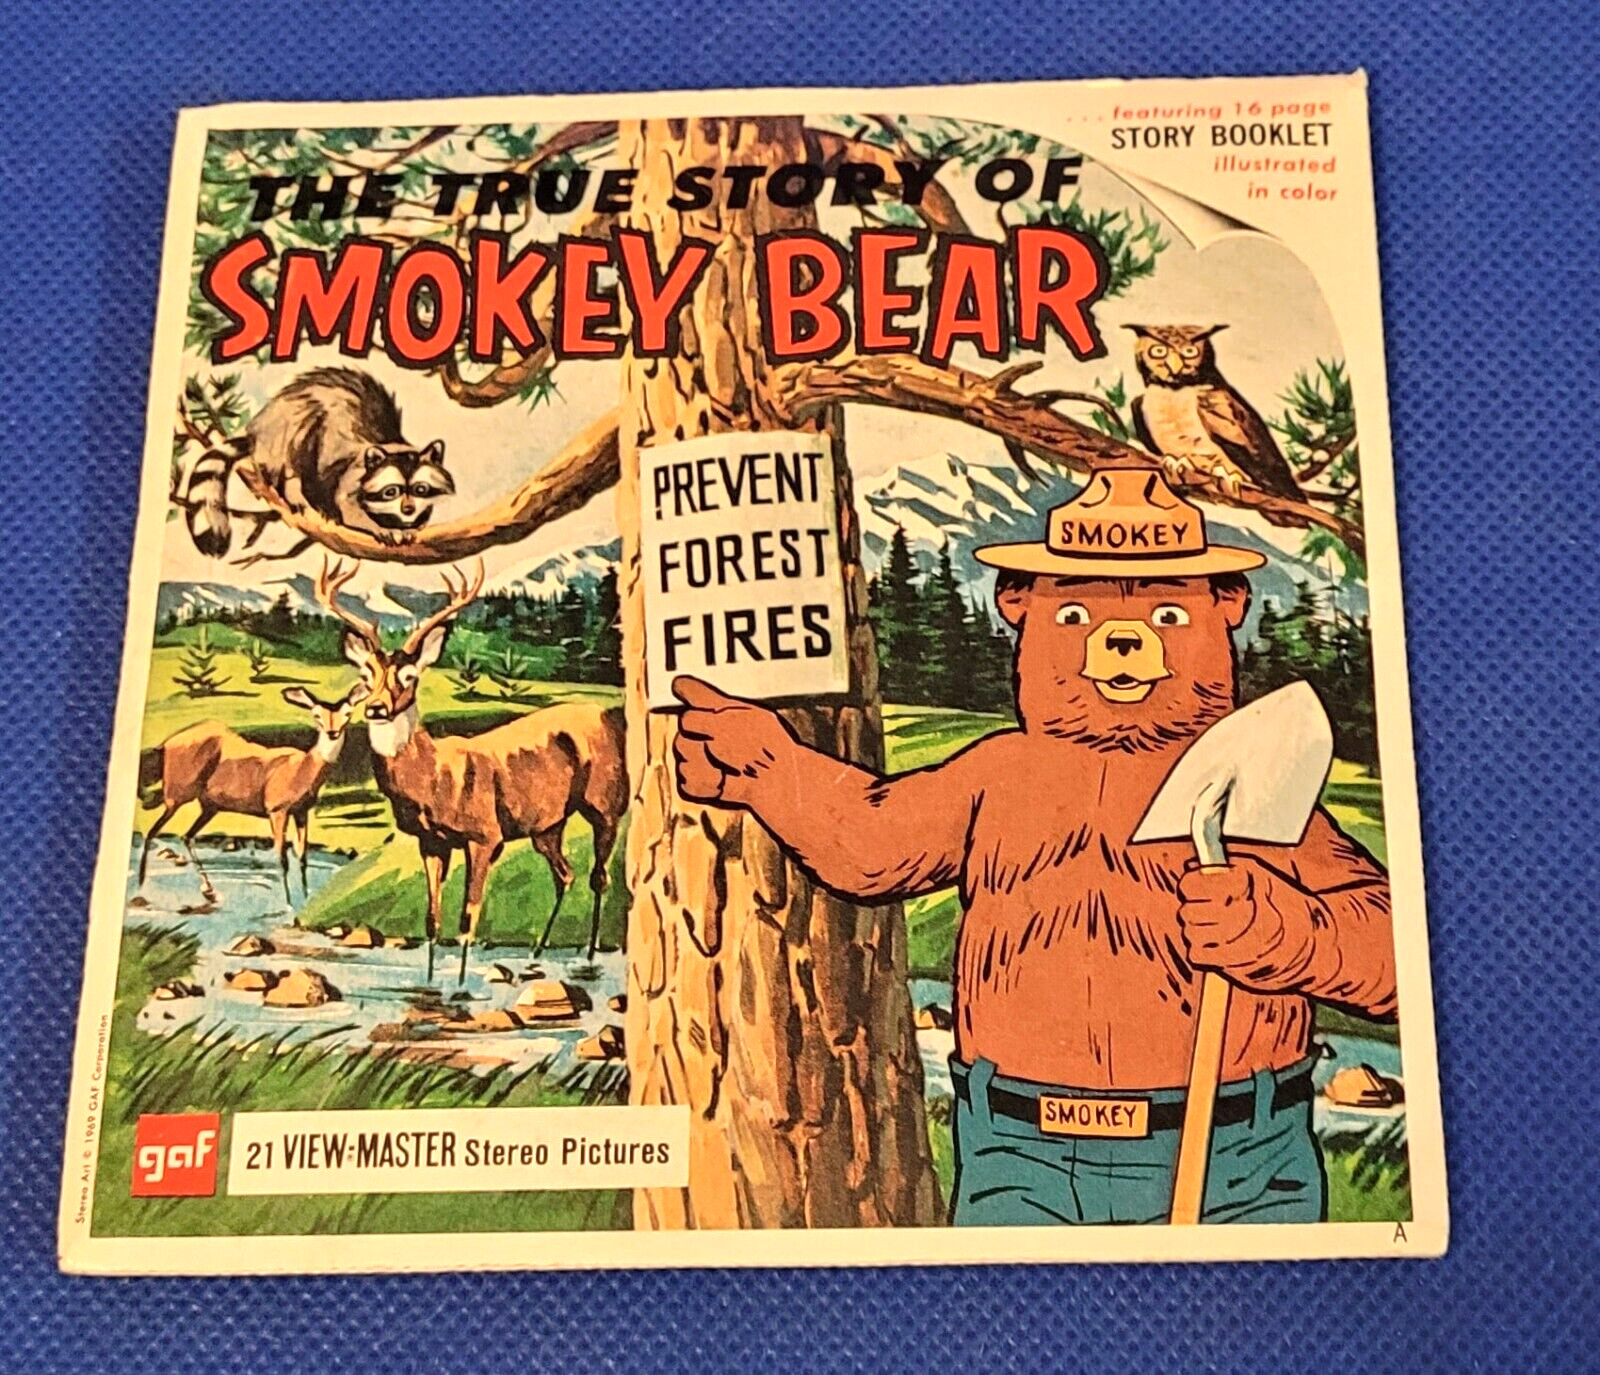 Gaf B405 True Story of Smokey Bear Prevent Forest Fires view-master Reels Packet